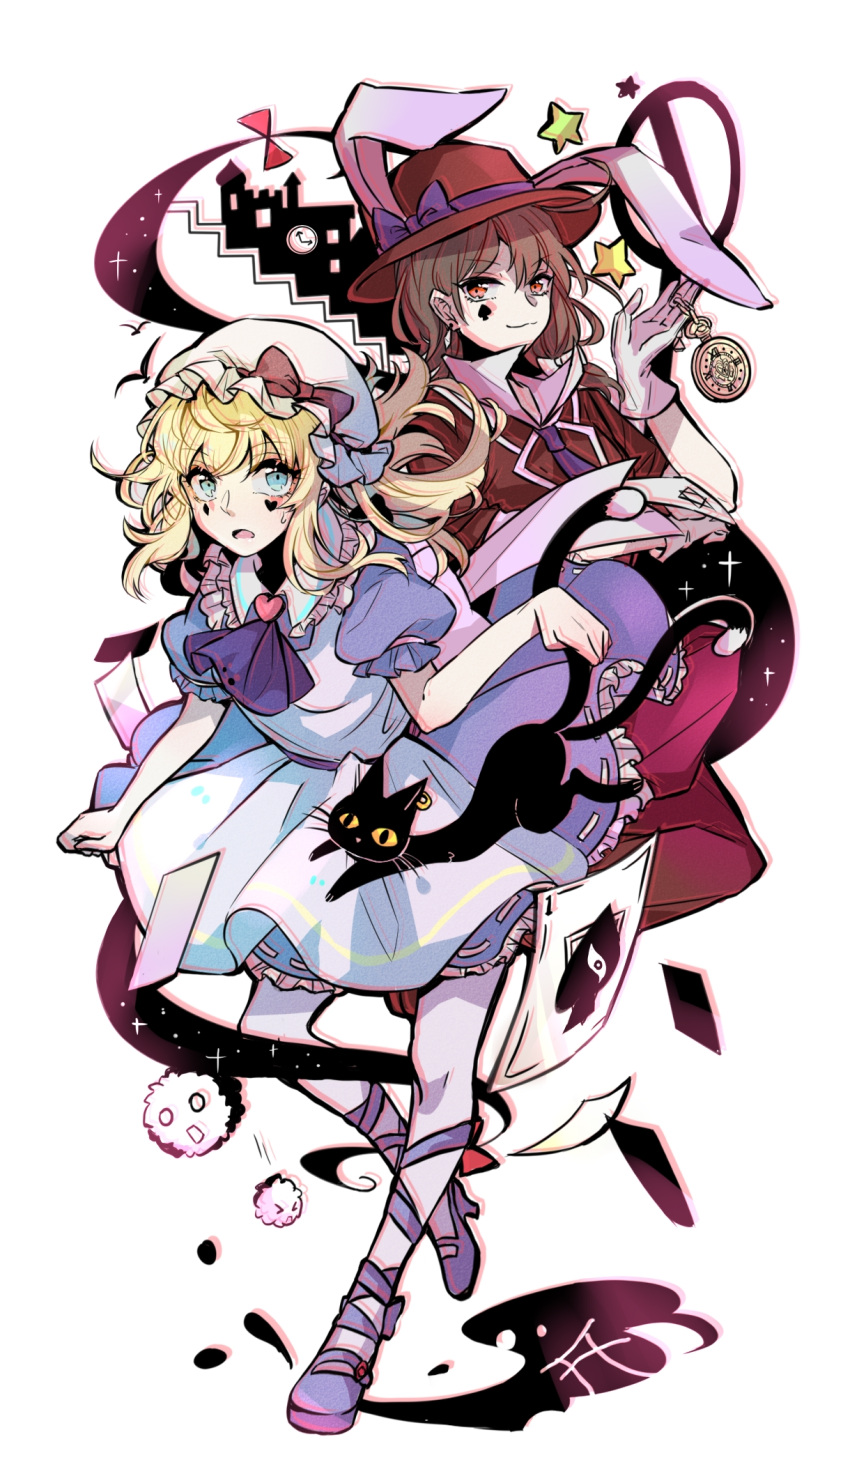 2girls :3 alice_(alice_in_wonderland) alice_(alice_in_wonderland)_(cosplay) alice_in_wonderland animal_ears apron ascot black_cat blonde_hair blue_dress blue_footwear bow brown_hair cat chen chen_(cat) chinese_commentary closed_mouth club_(shape) collared_dress commentary_request cosplay diamond_(shape) dress facial_mark floating_hair full_body gap_(touhou) hat hat_bow heart high_heels highres kedama_(touhou) maribel_hearn medium_hair mob_cap multiple_girls multiple_tails necktie open_mouth pocket_watch puffy_short_sleeves puffy_sleeves purple_ascot purple_bow purple_necktie rabbit_ears red_bow red_headwear red_shirt ribbon-trimmed_dress shirt short_sleeves star_(symbol) tail touhou two_tails usami_renko watch white_apron white_headwear white_rabbit_(alice_in_wonderland) white_rabbit_(alice_in_wonderland)_(cosplay) xingxing_qiaosida